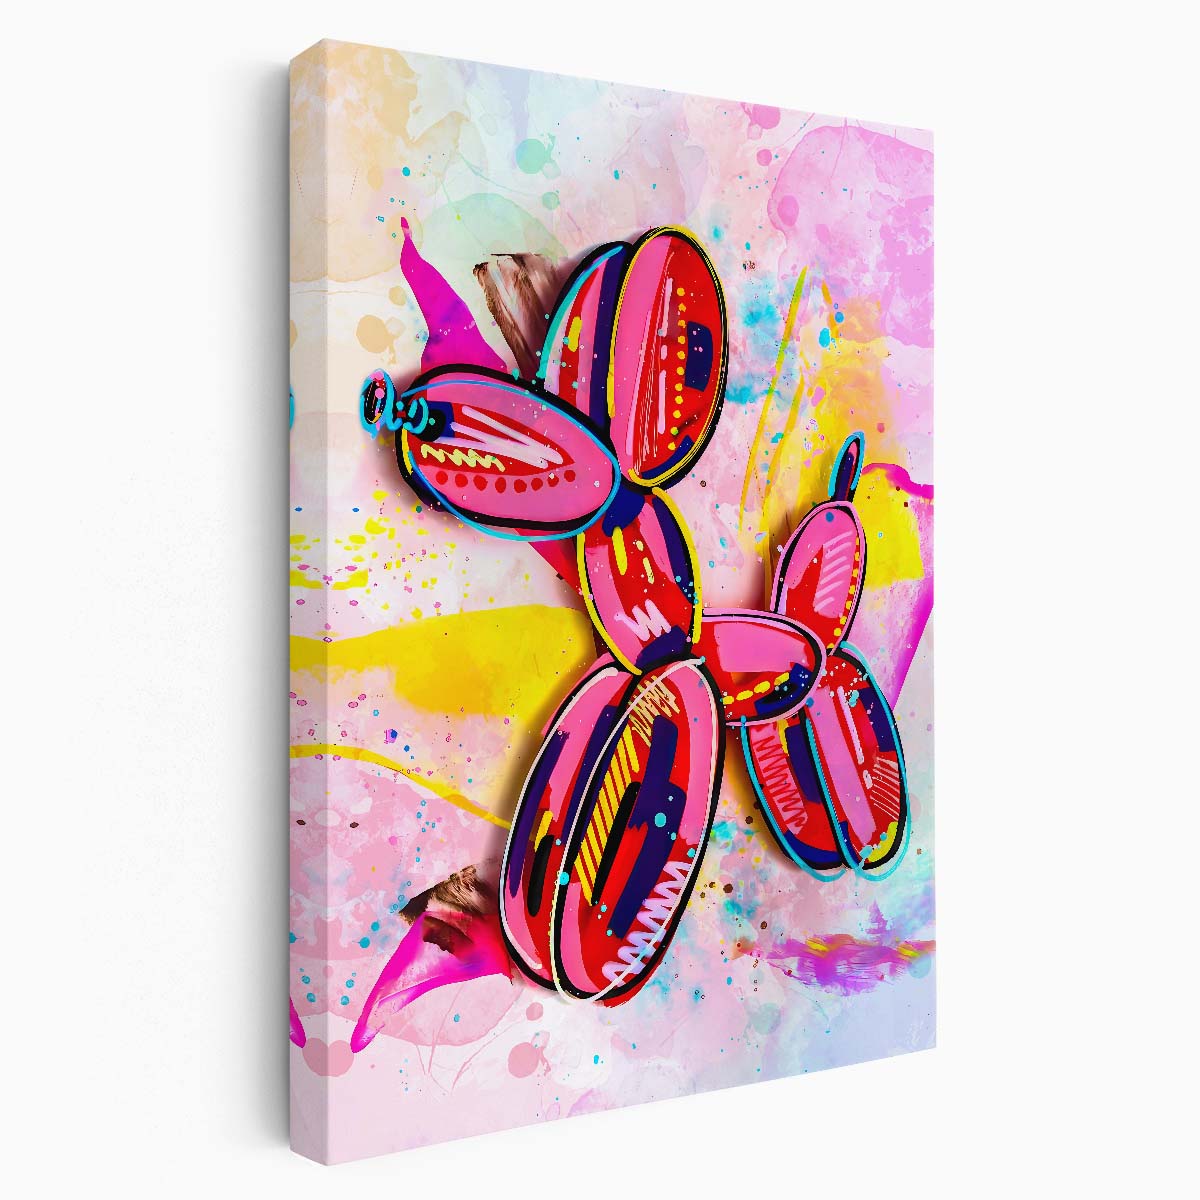 Pink Balloon Dog Graffiti Wall Art by Luxuriance Designs. Made in USA.